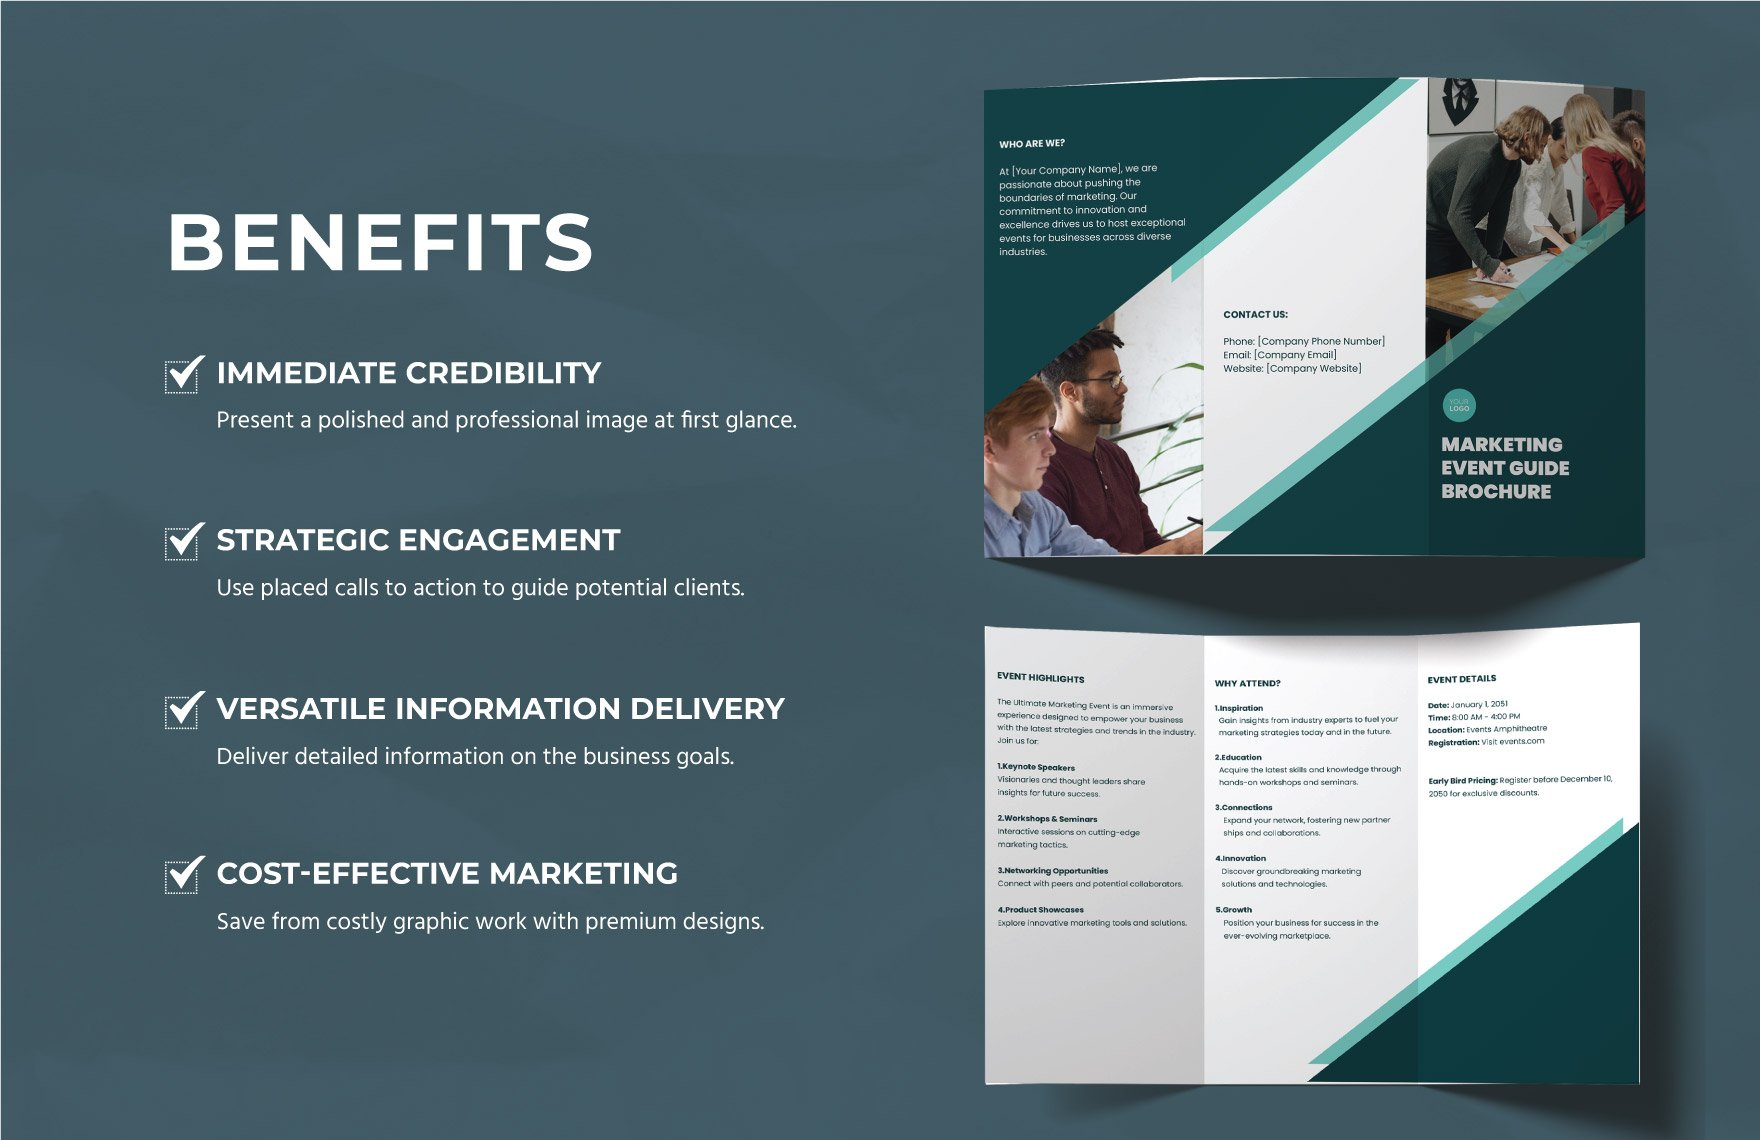 Marketing Event Guide Brochure Template